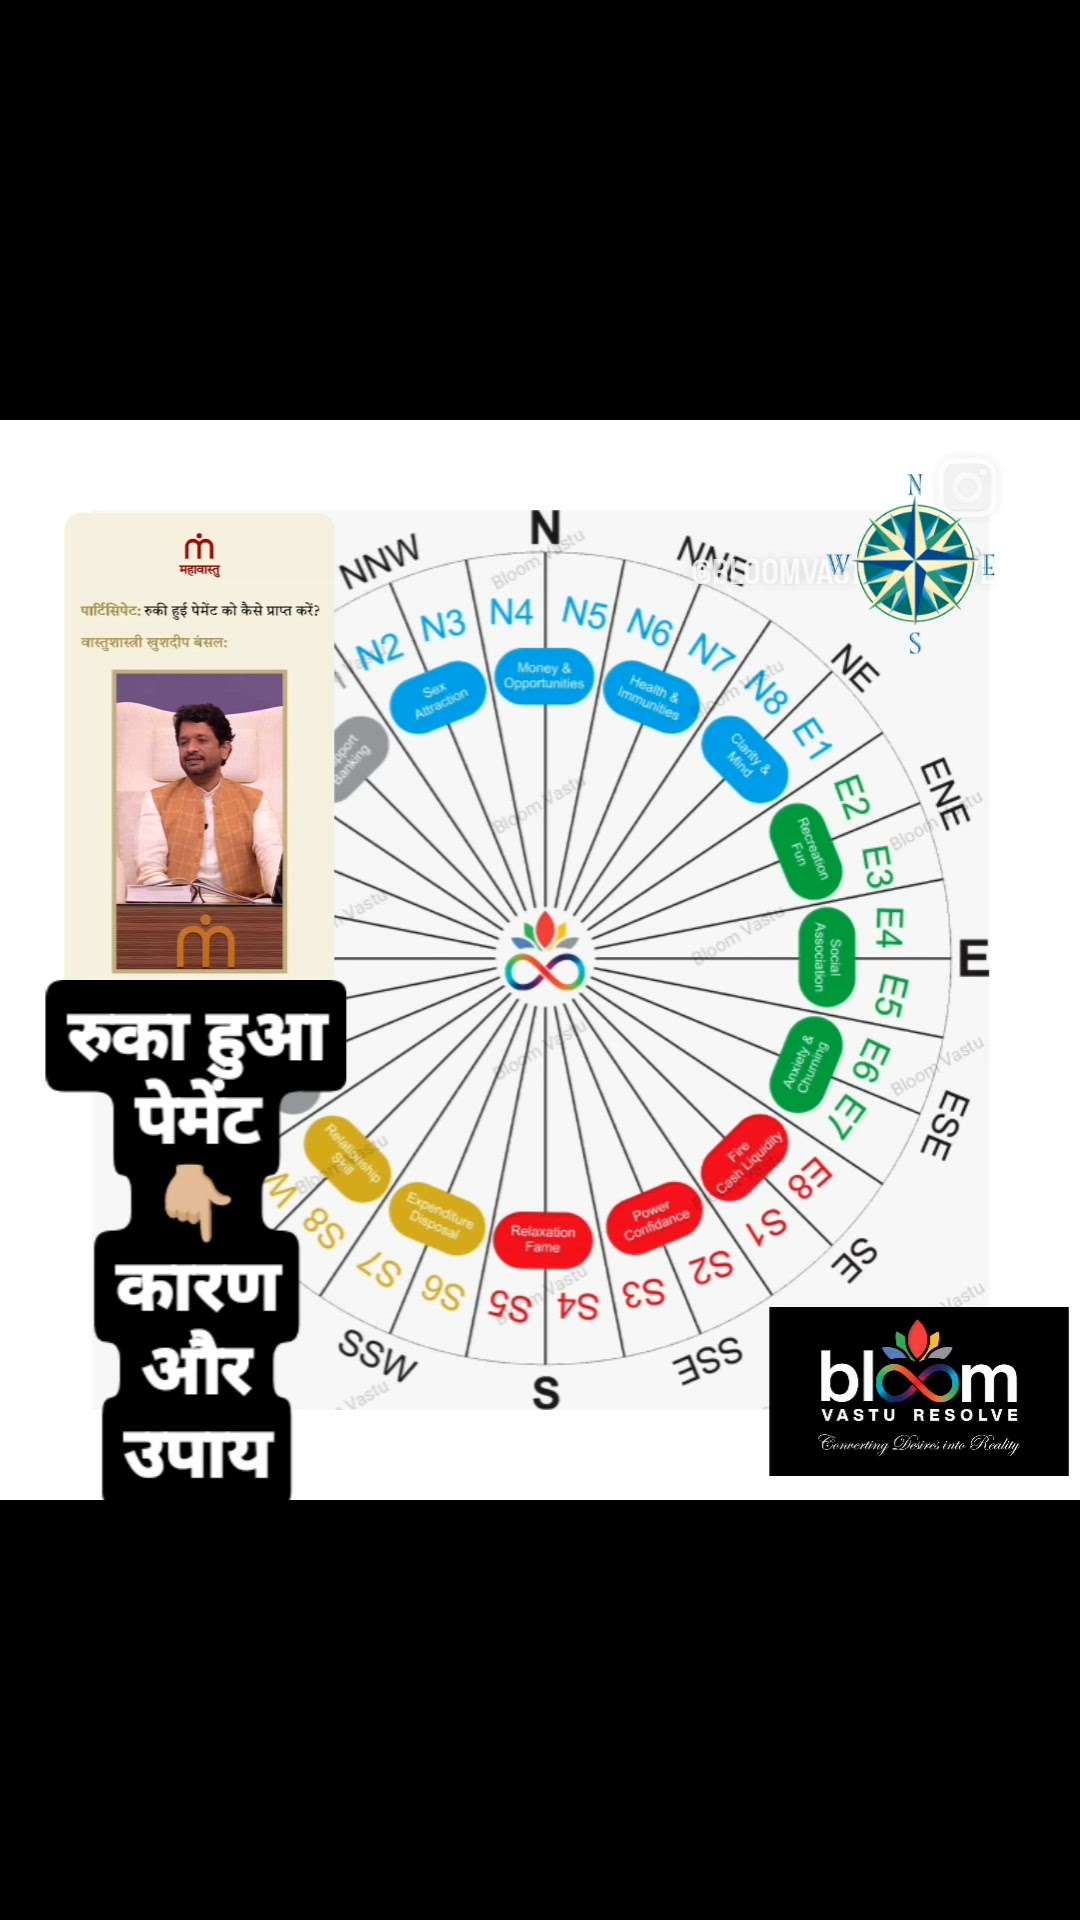 If you need Vastu information before uploading on Facebook then follow on Instagram also.
गुरुसखा की वाणी 🎤:   How to recover block payment?
Comments are always welcome.
For more Vastu please follow @bloomvasturesolve
on YouTube, Instagram & Facebook
.
.
For personal consultation, feel free to contact certified MahaVastu Expert through
M - 9826592271
Or
bloomvasturesolve@gmail.com

#vastu #वास्तु #mahavastu #mahavastuexpert #bloomvasturesolve #vastuforhome #vastureels #vastulogy #vastuexpert #advancevastu #vasturemedy #vastuforhealth #sezone #vastuformoney#cashflow #vastuforpayment  #blockpayment #trendingreels